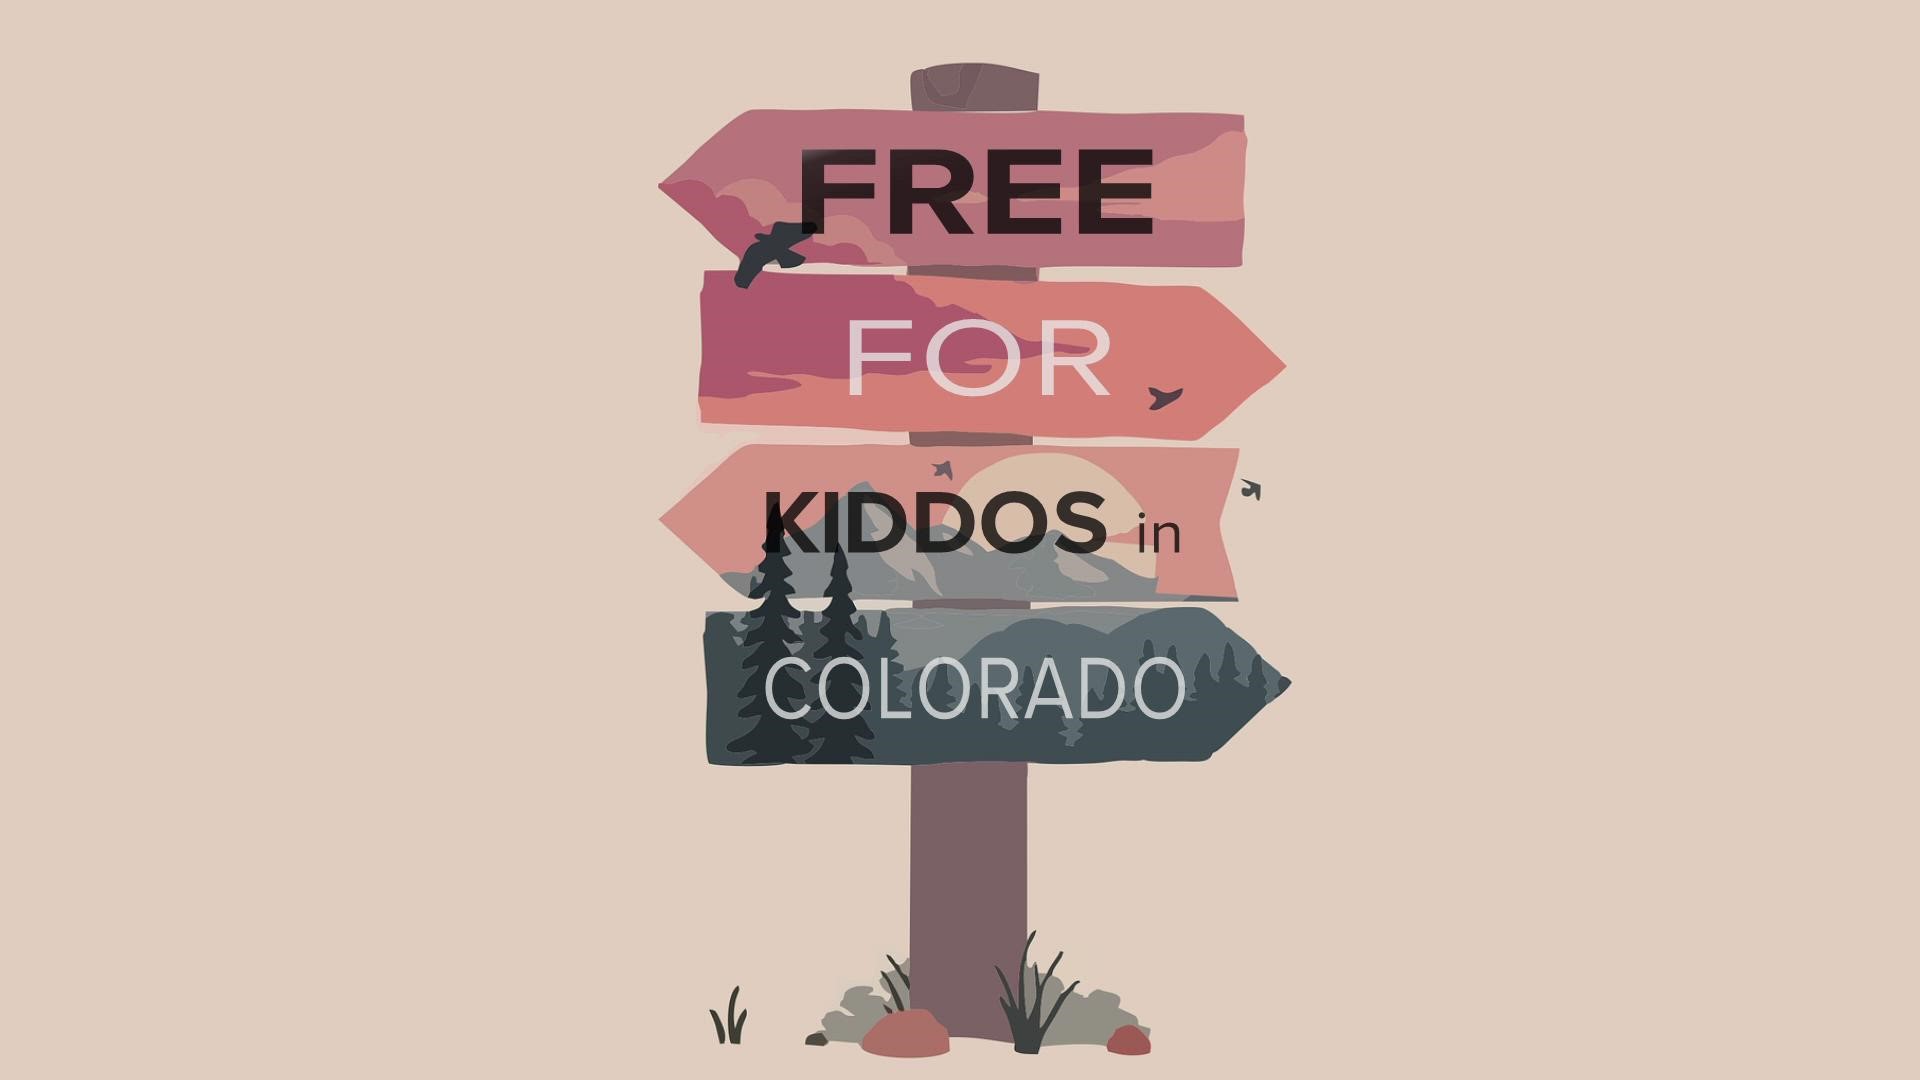 There's lots of free events for the kiddos and families this weekend in Colorado.